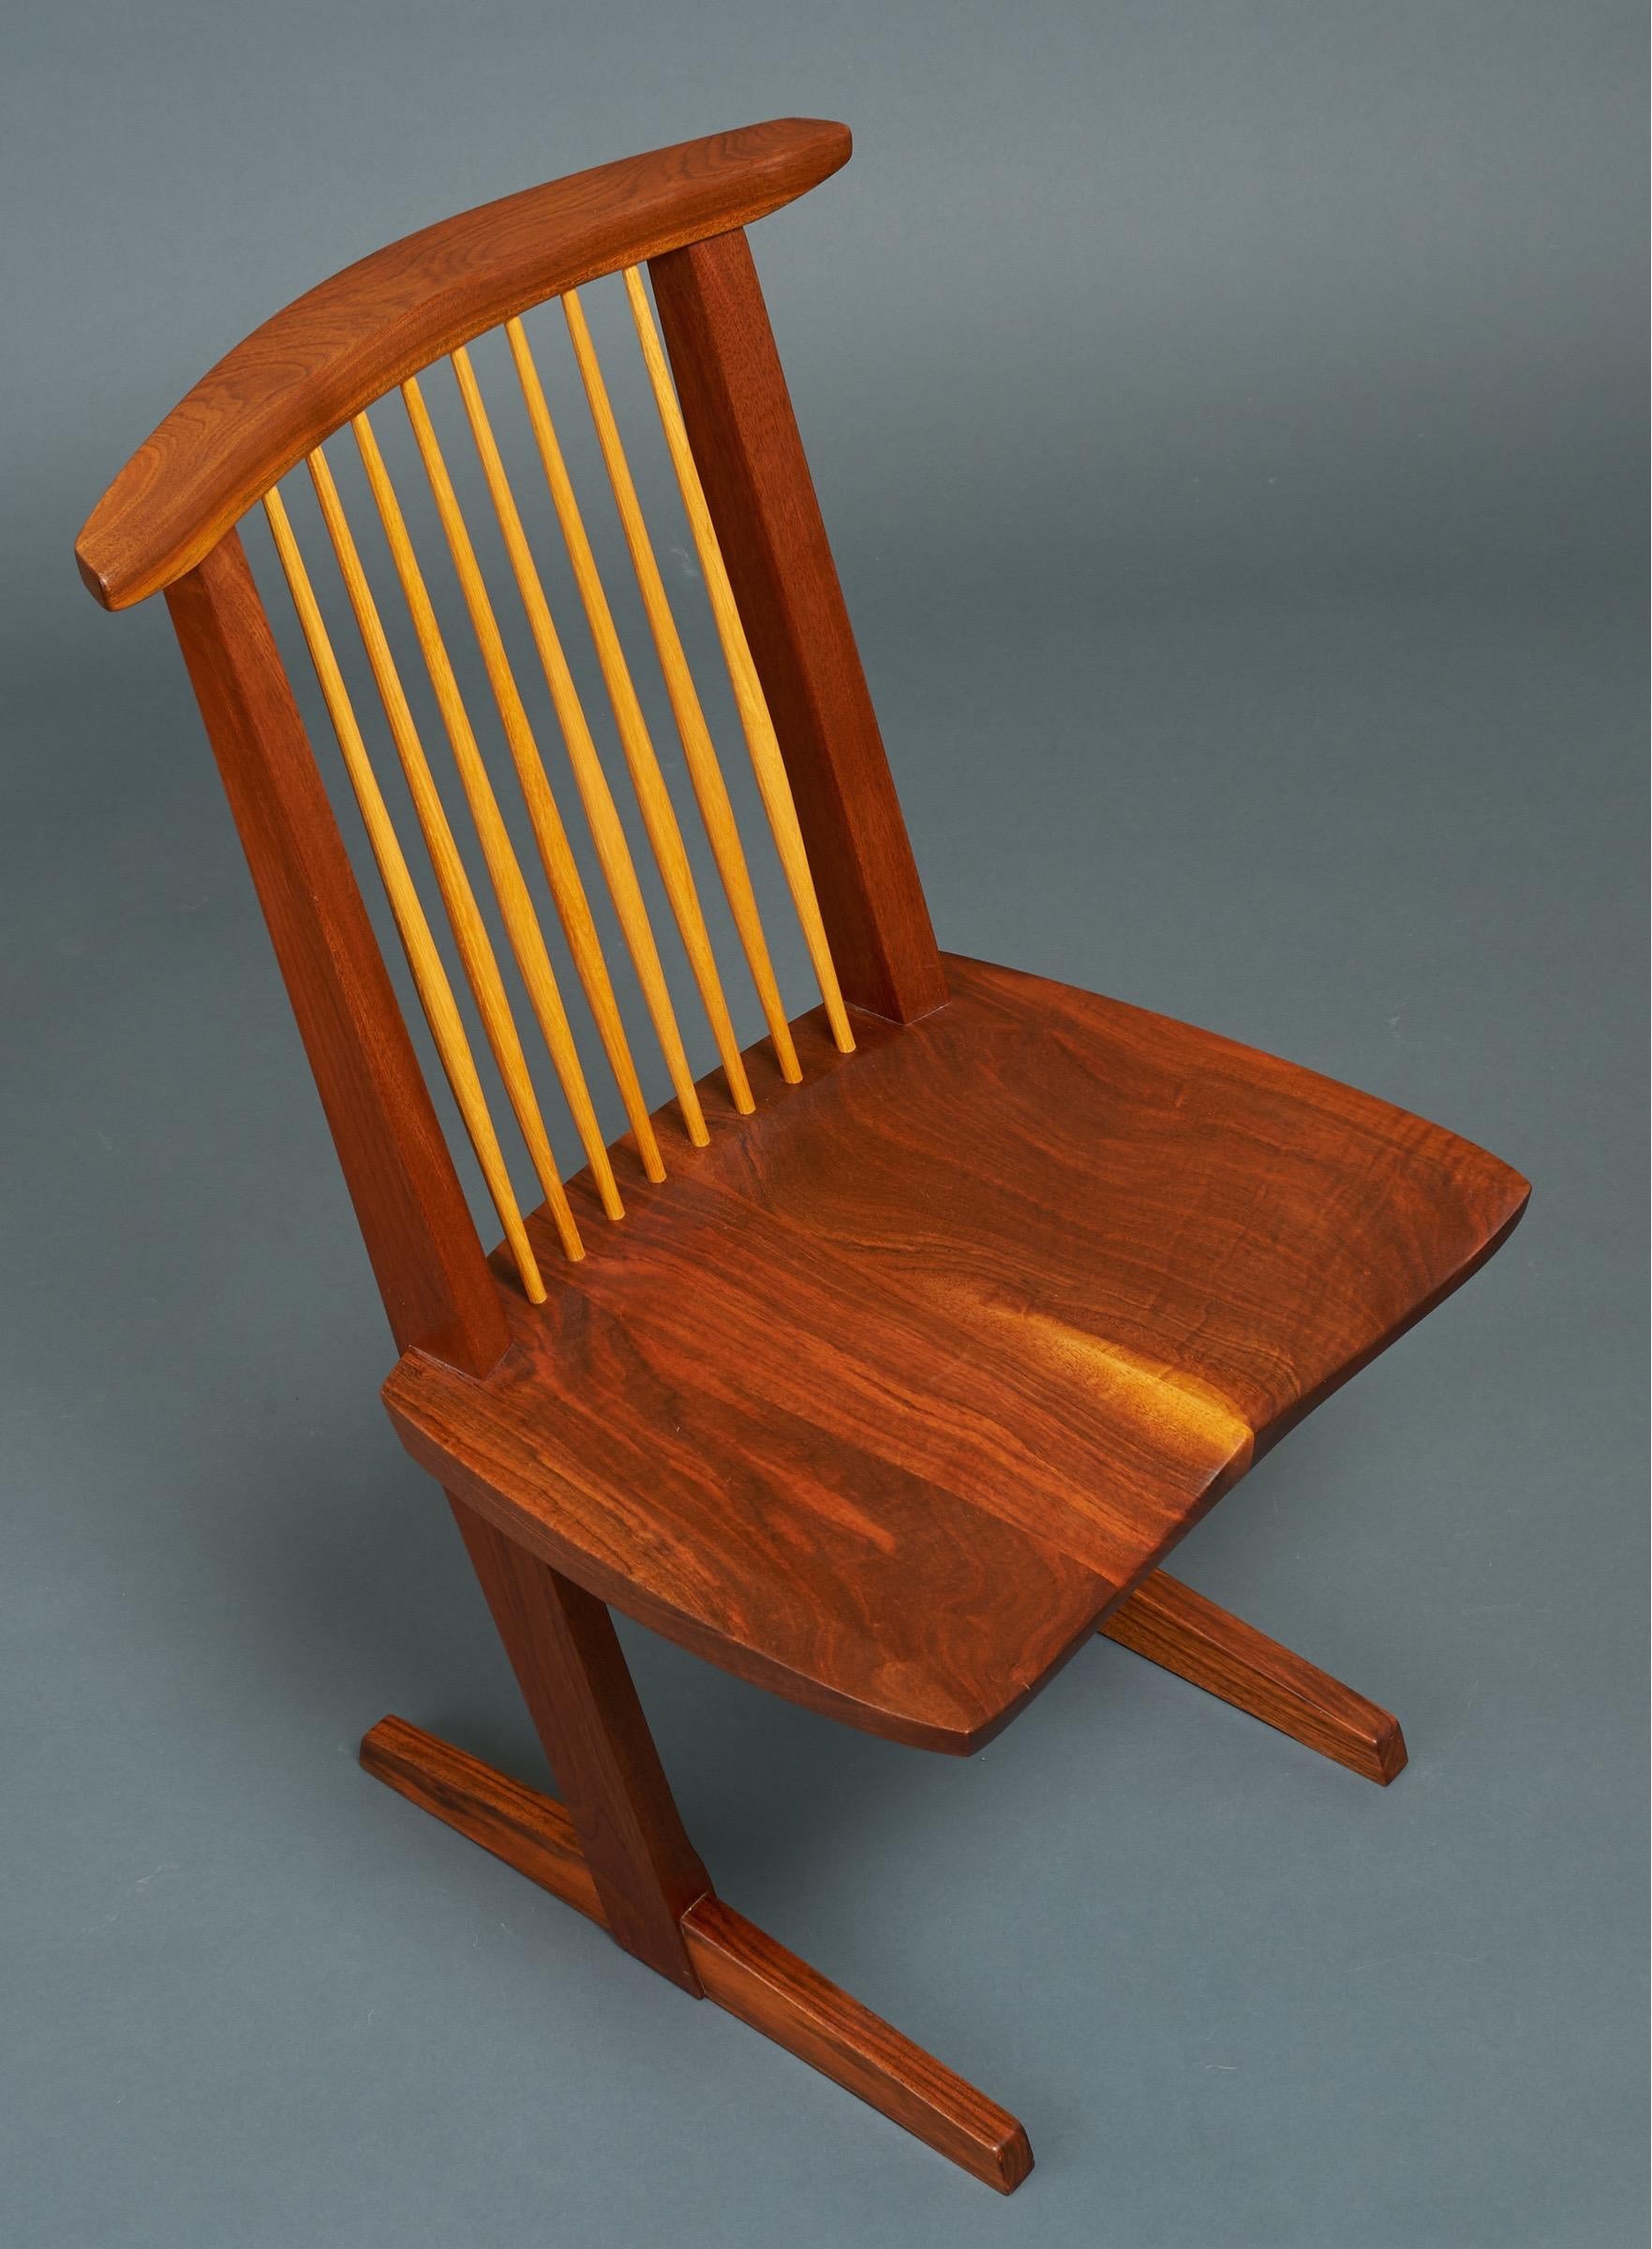 George Nakashima, Rare Sculptural Pair of Conoid Chairs in Walnut, Signed, 1989 For Sale 4